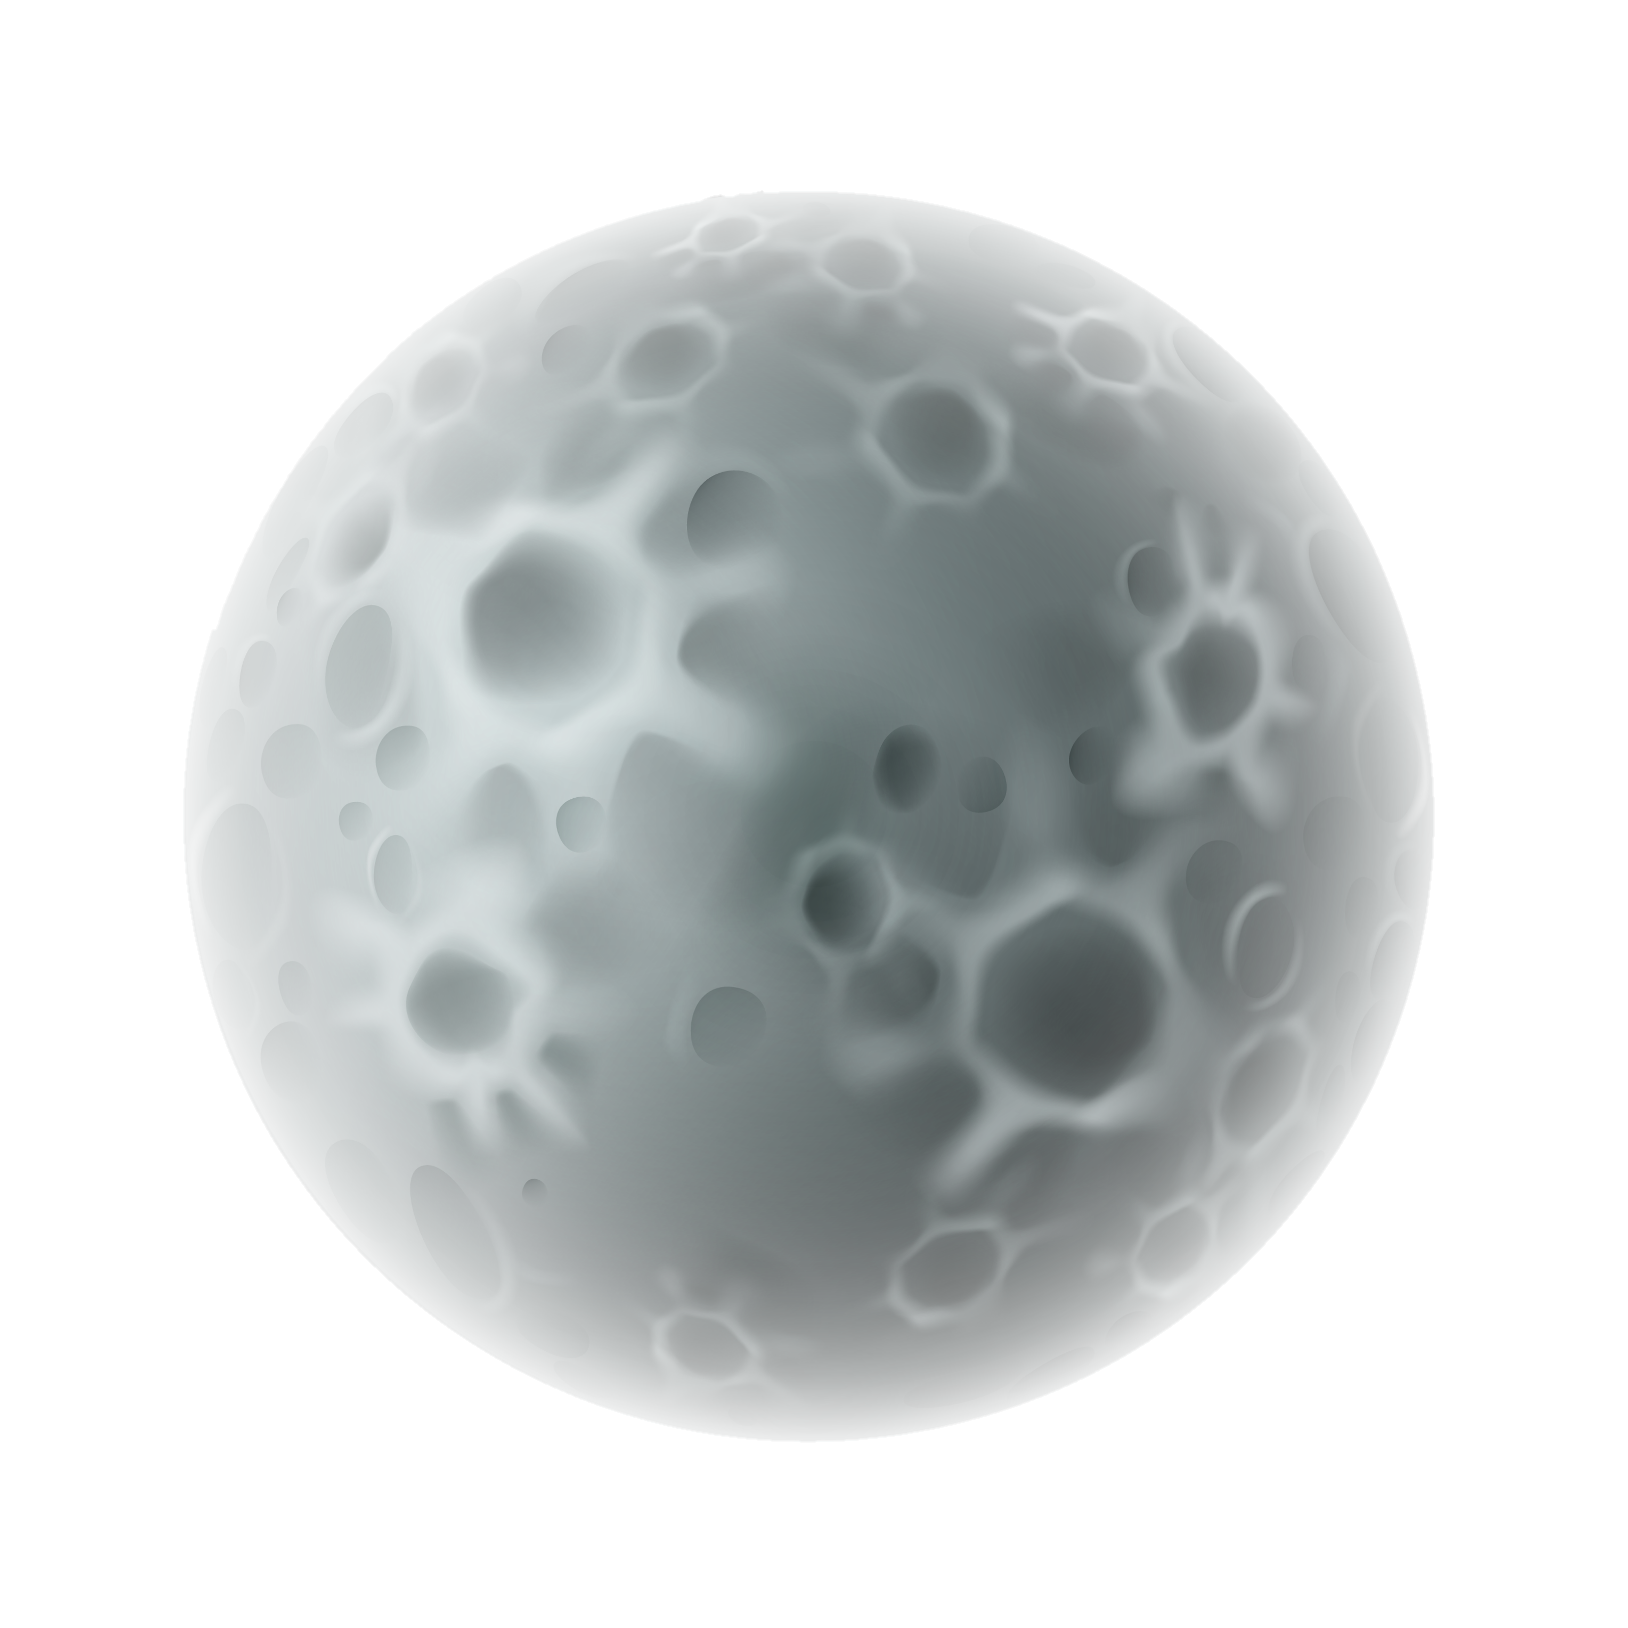 moon-from-pngfre-24